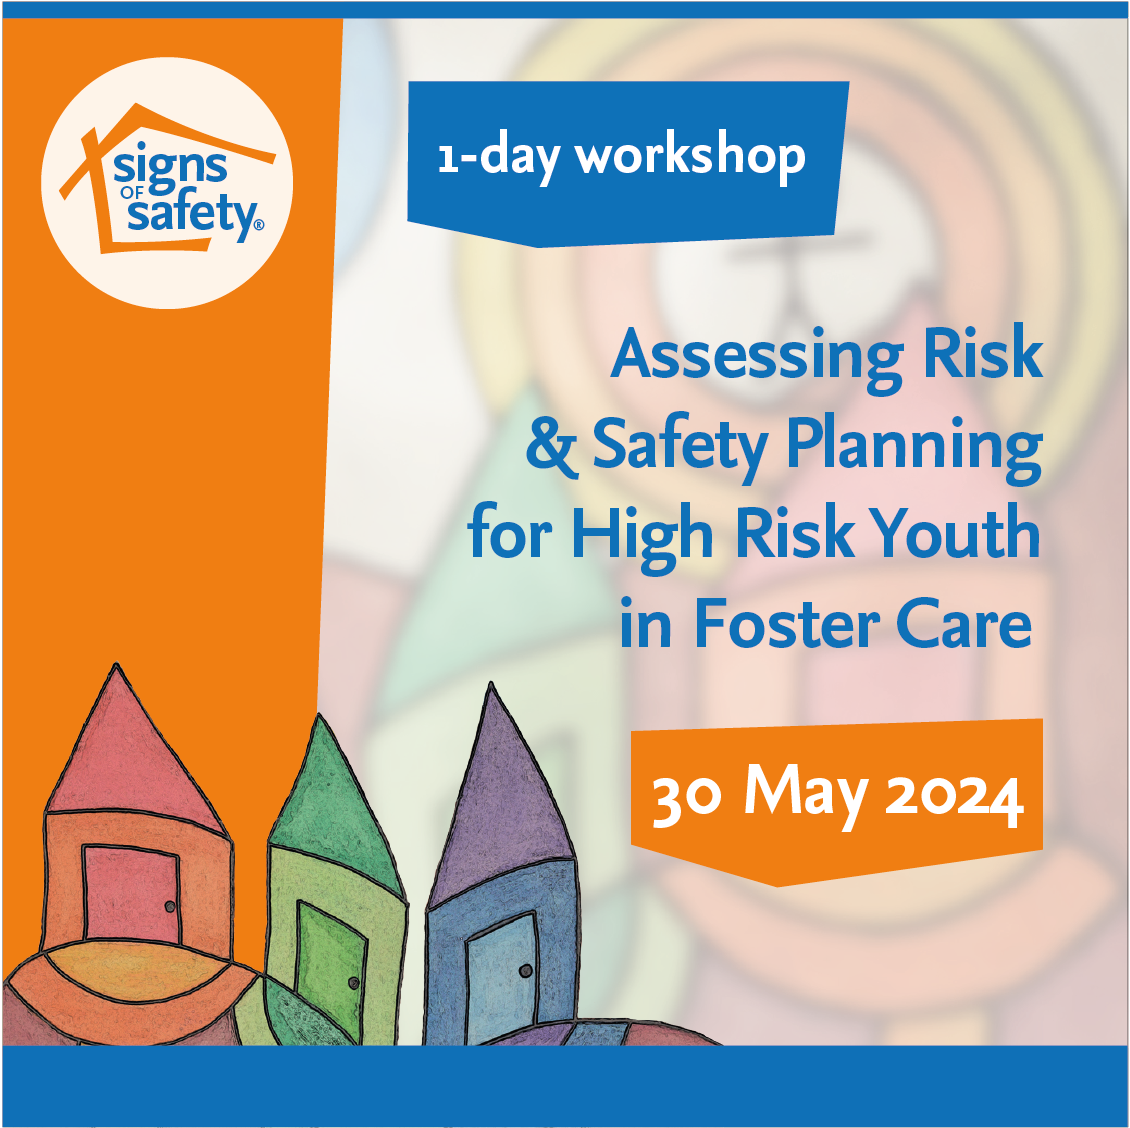 Assessing Risk and Safety Planning for High Risk Youth in Foster Care